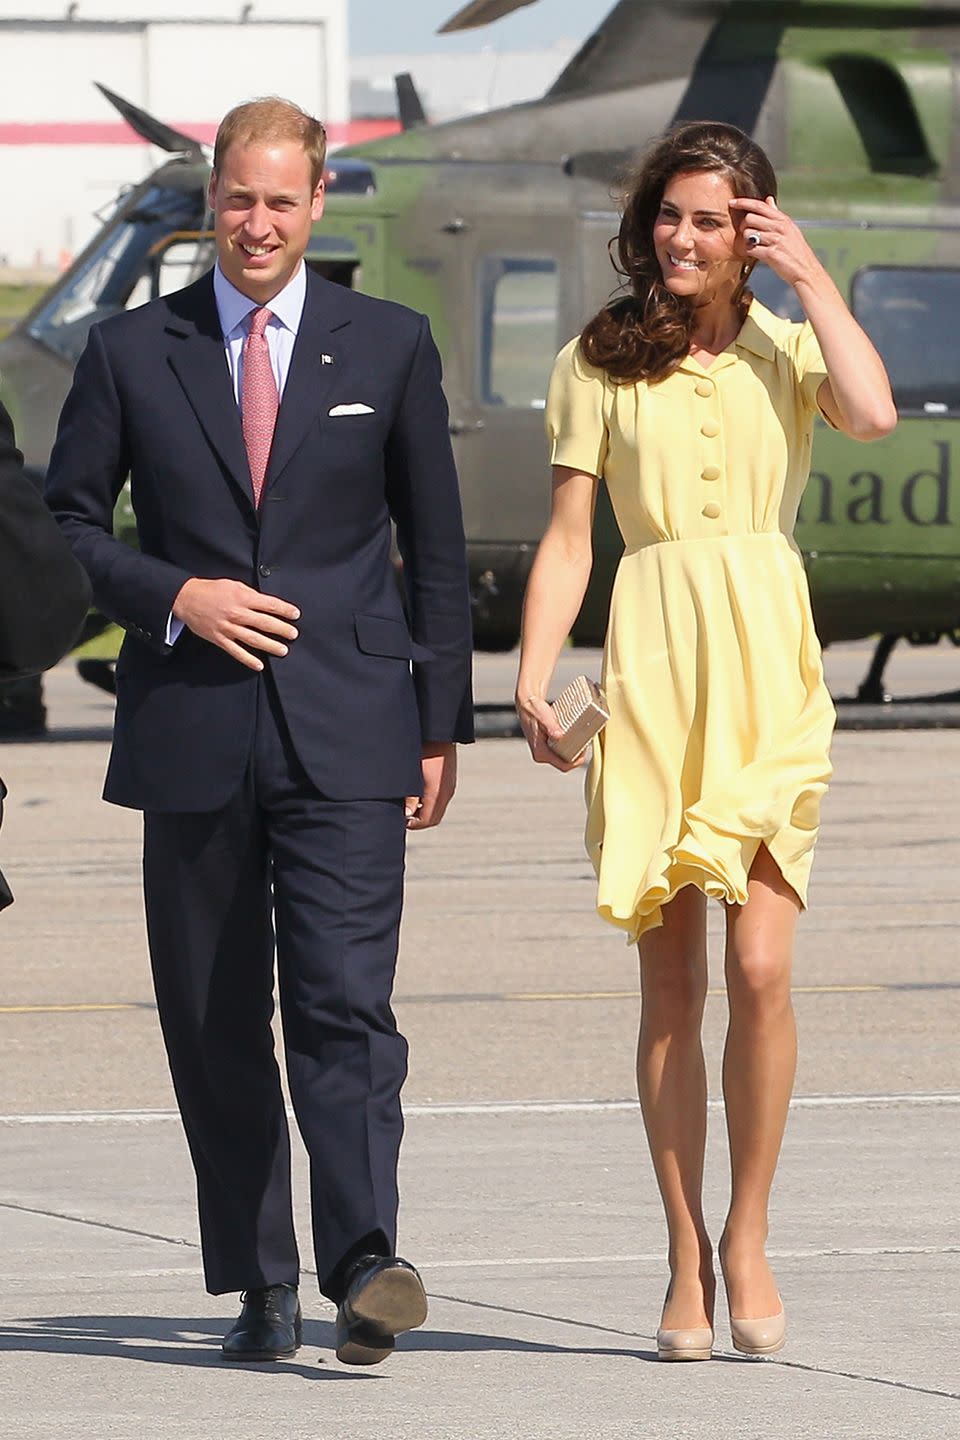 Kate Middleton exposed her knees…